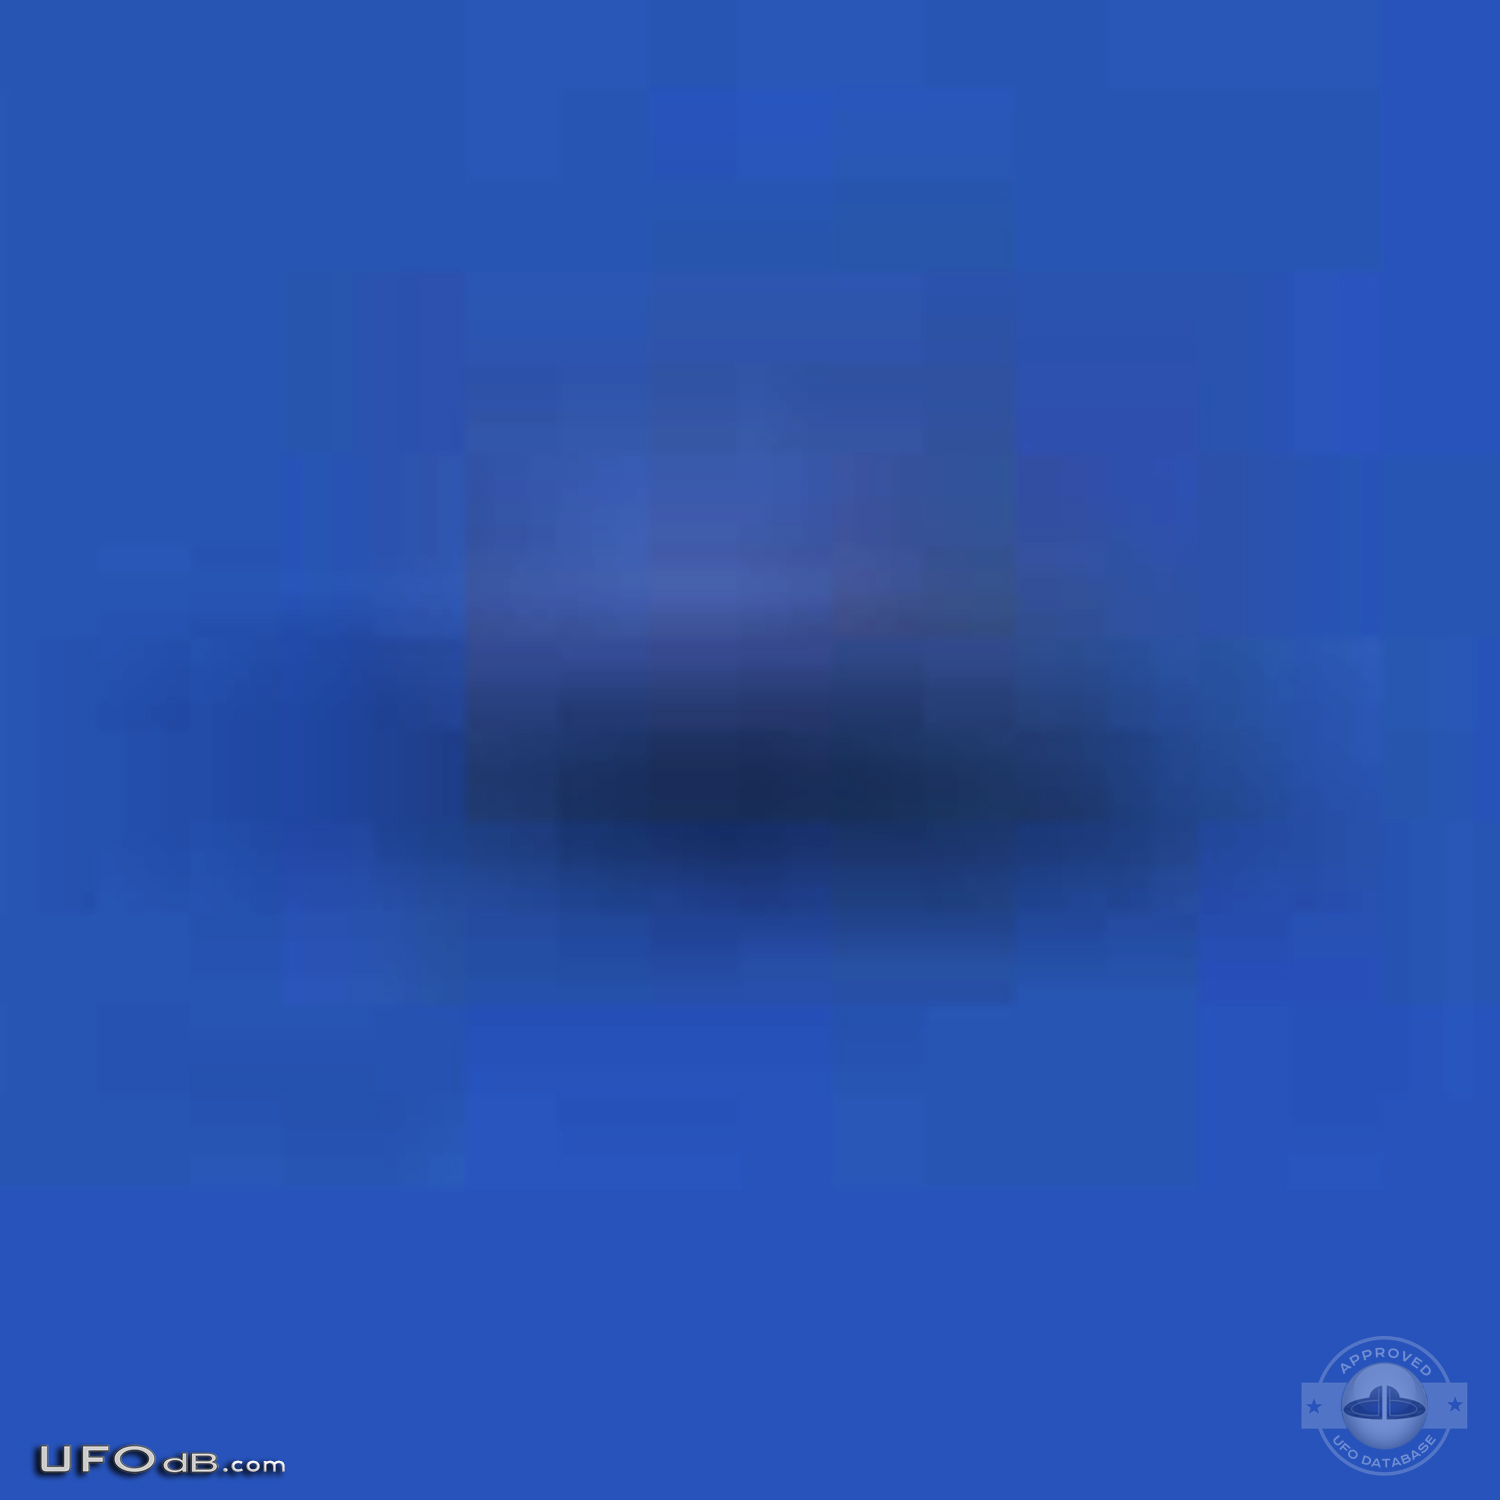 In Cape Town, South Africa a man get picture of UFO near Airplane 2011 UFO Picture #386-4